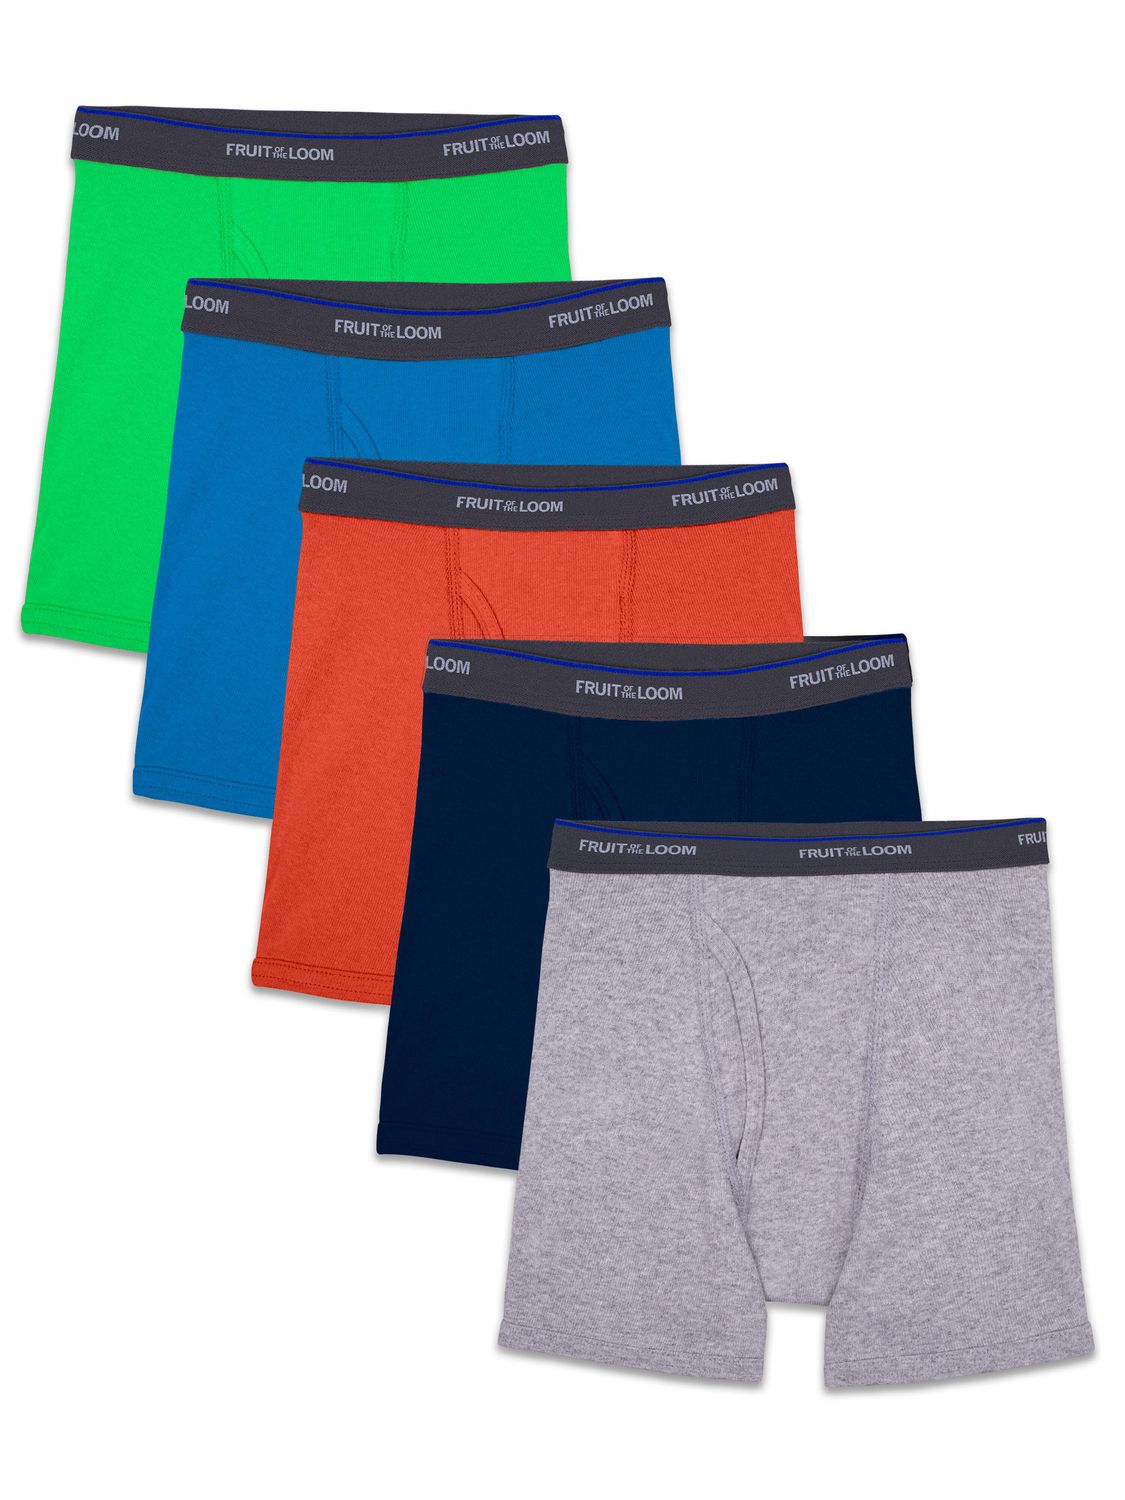 Fruit Of The Loom Boys Boxer Briefs Underwear 100% Cotton Set of 10 4T/5T  New